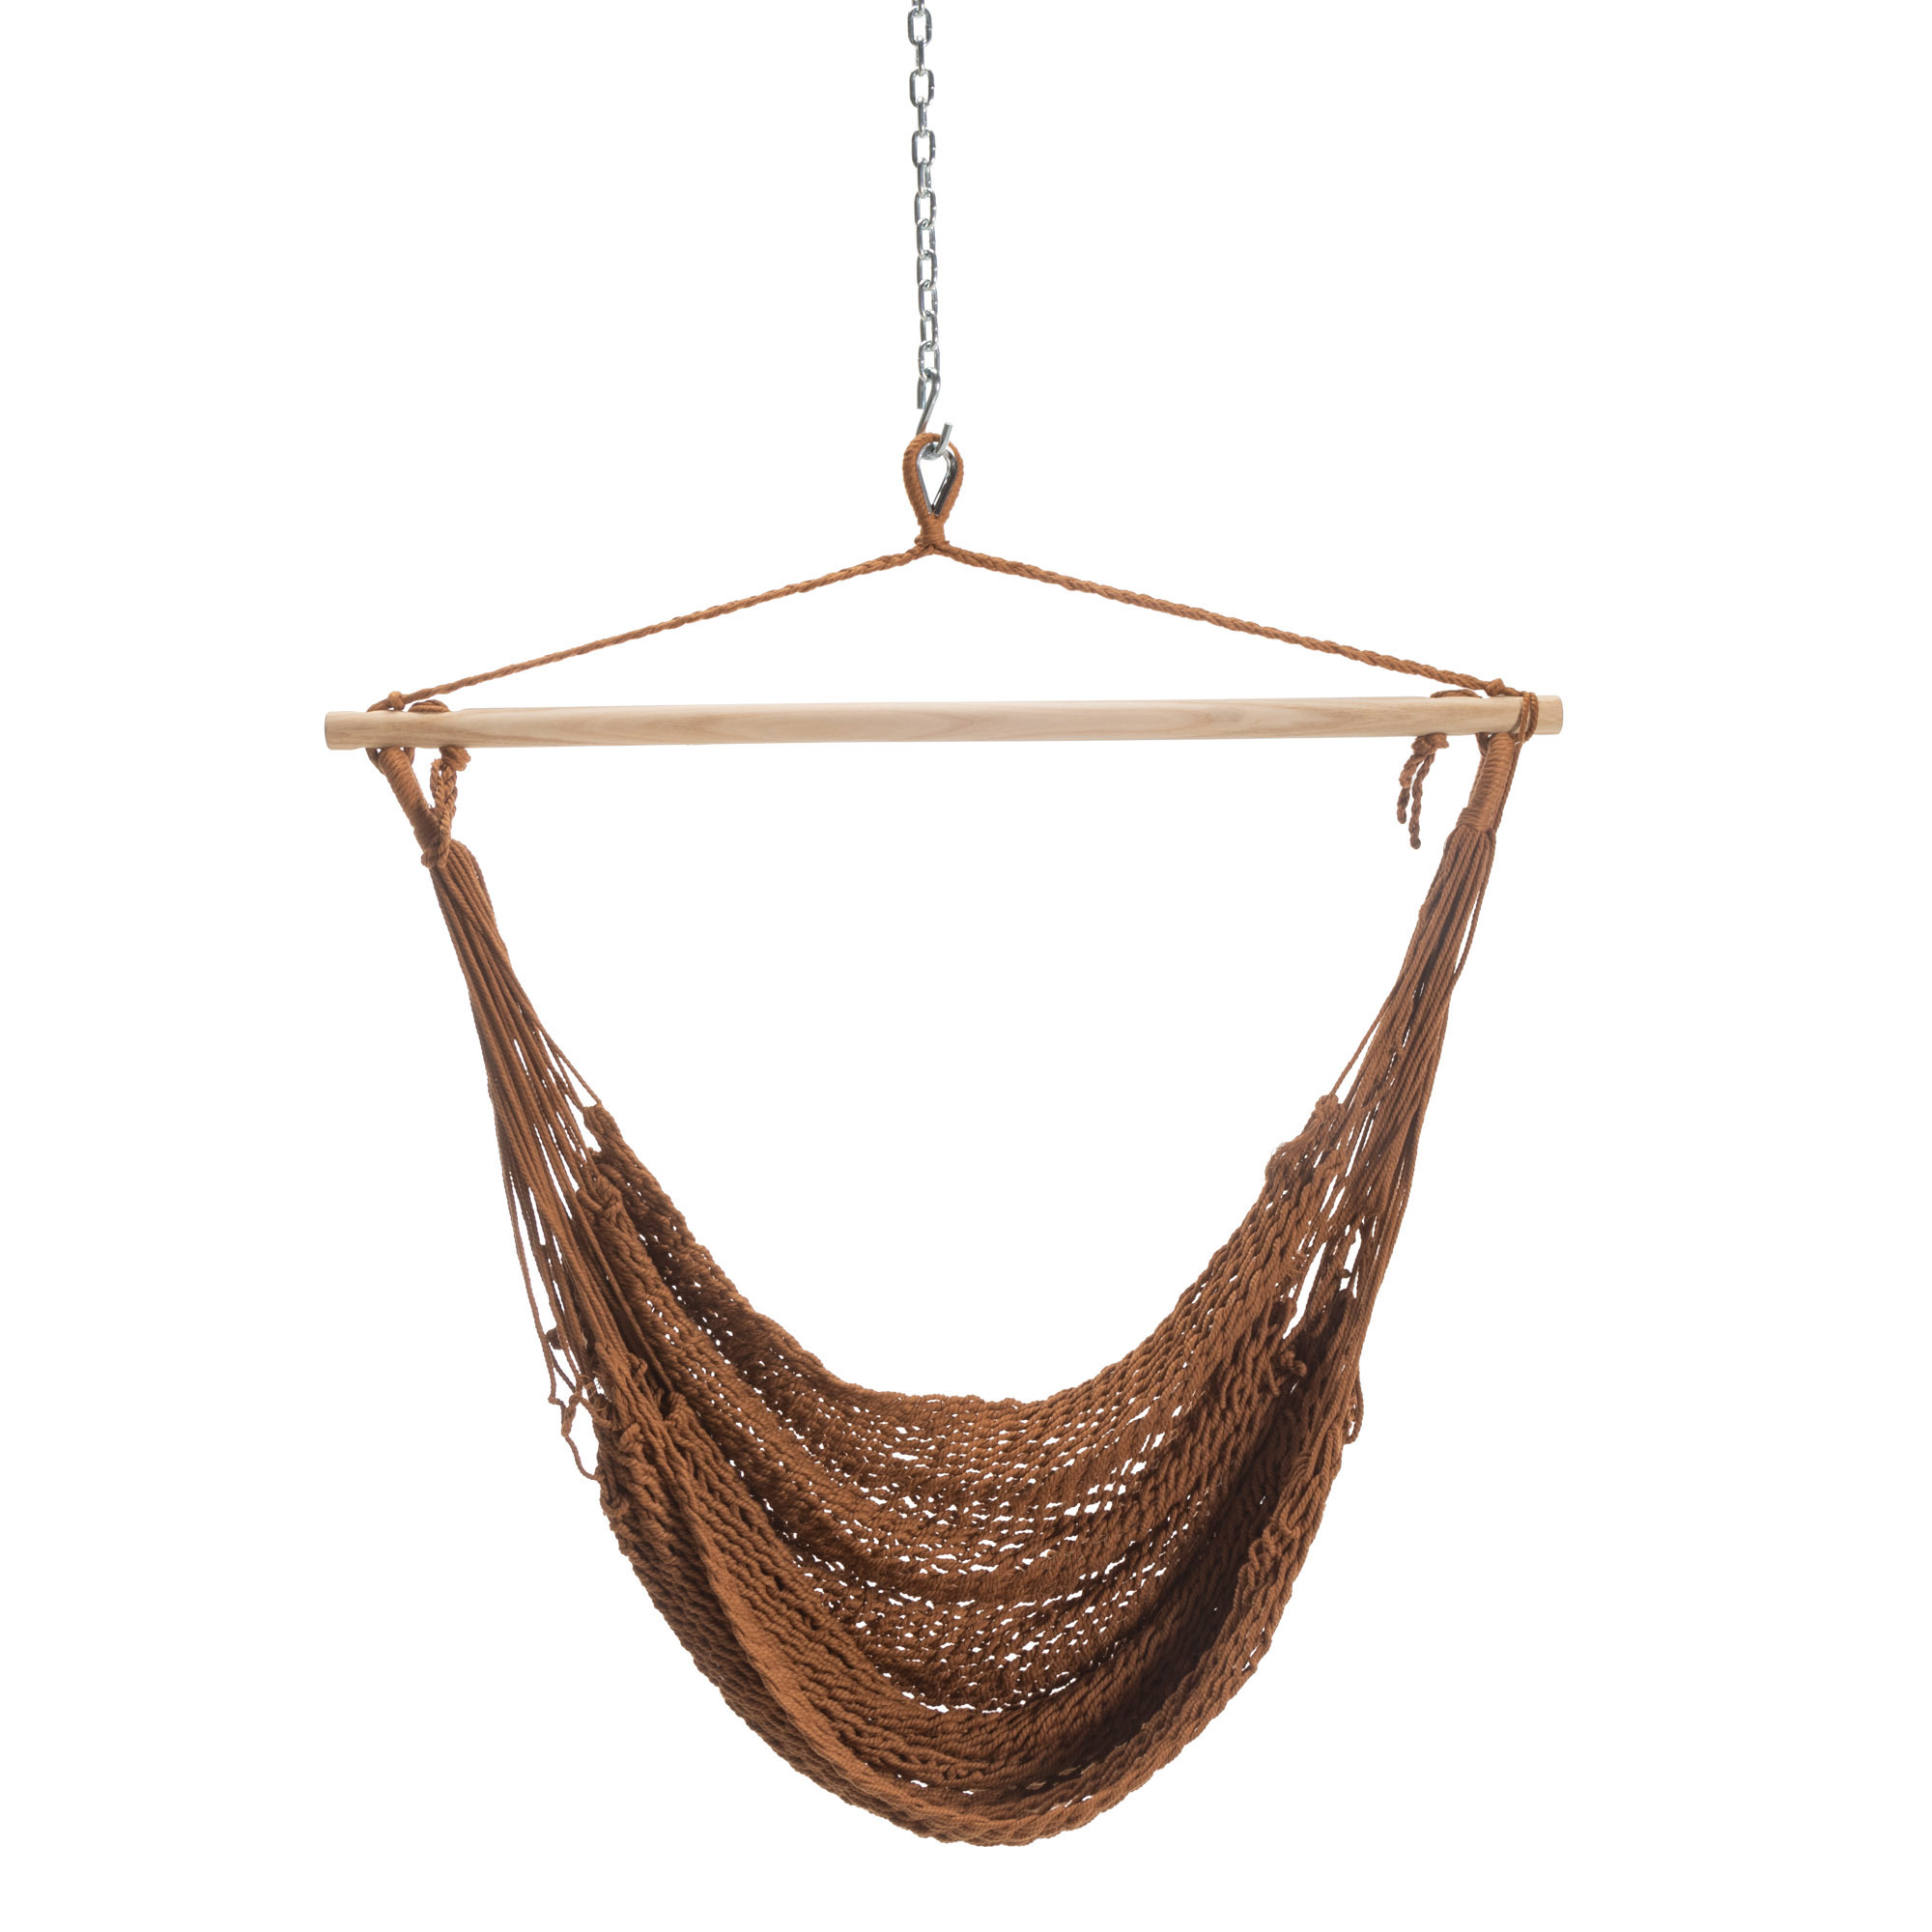 Castaway Living, Single Polyester Rope Swing - Brown, Color Brown, Capacity 250 lb, Material Polyester, Model 311AB